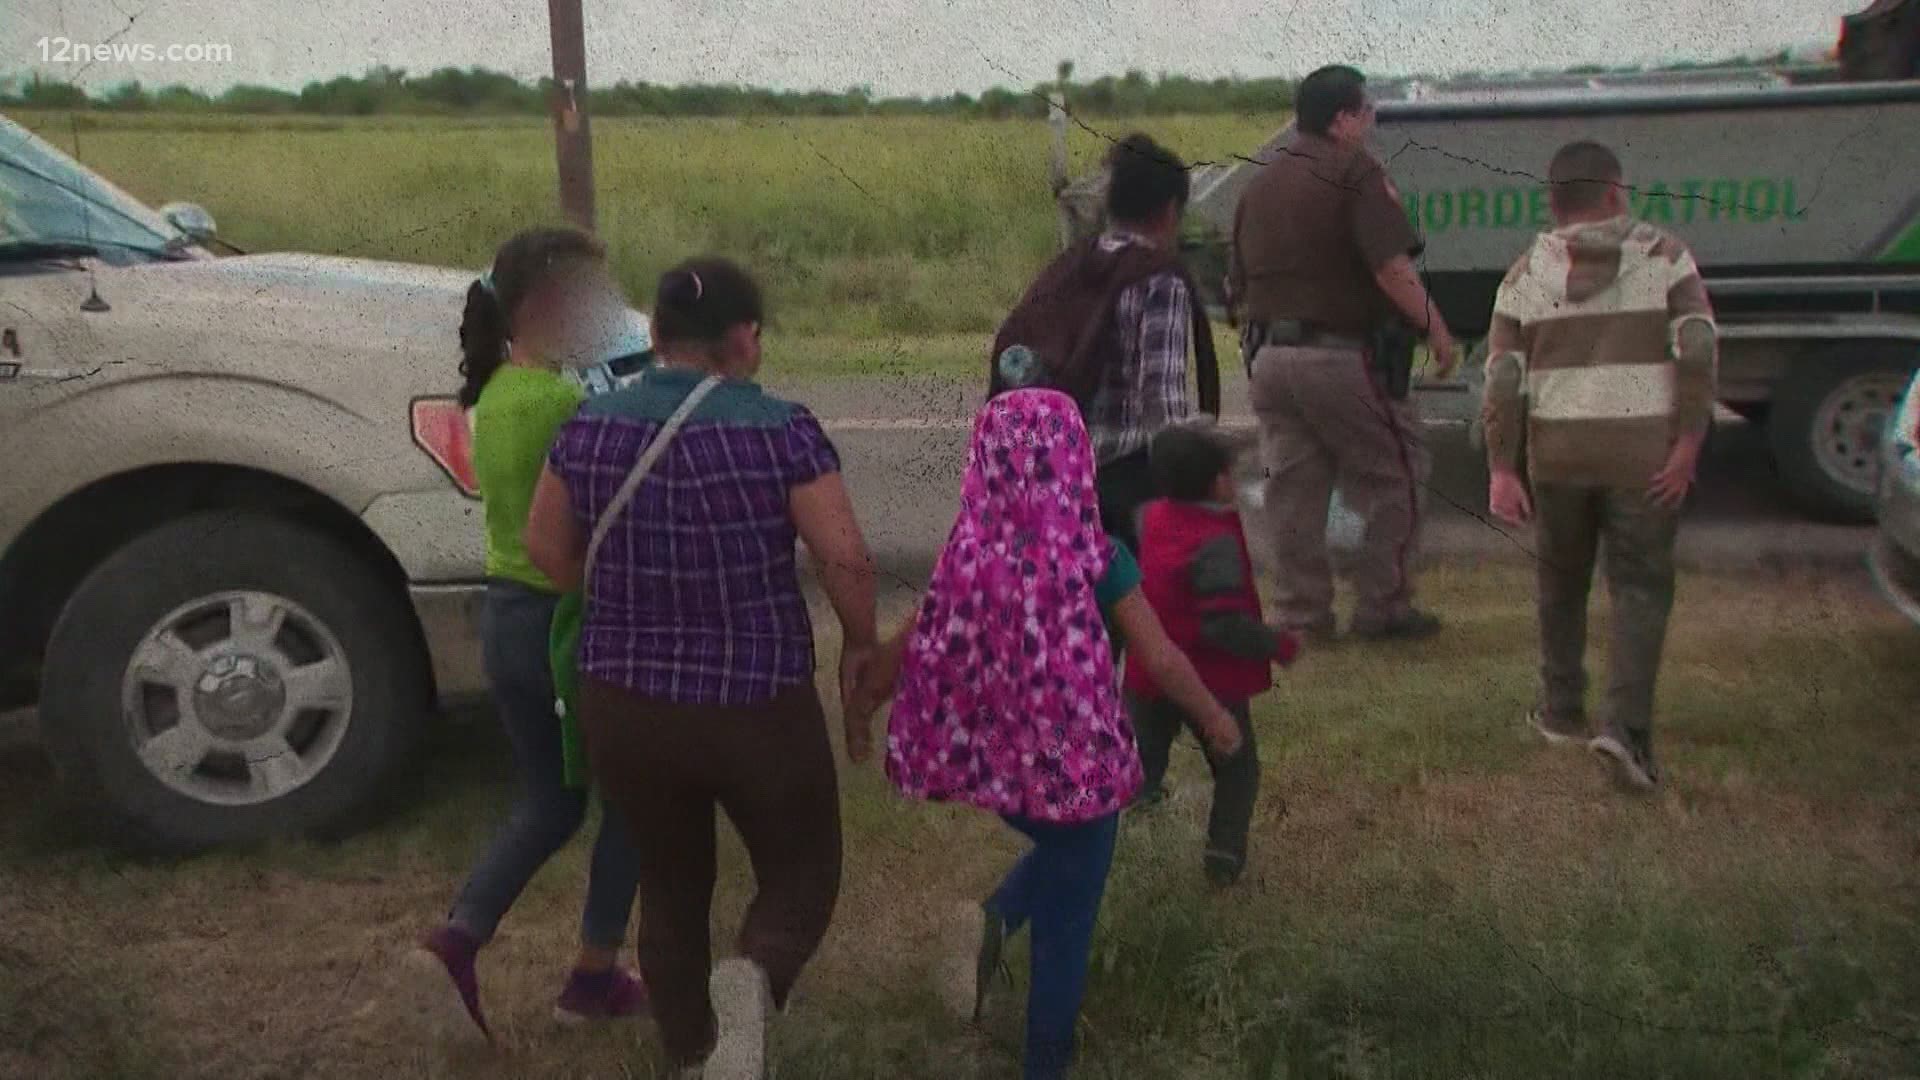 Migrant families keep arriving at the U.S. border seeking asylum and a Phoenix church is stepping up to help. One family is speaking about the process.